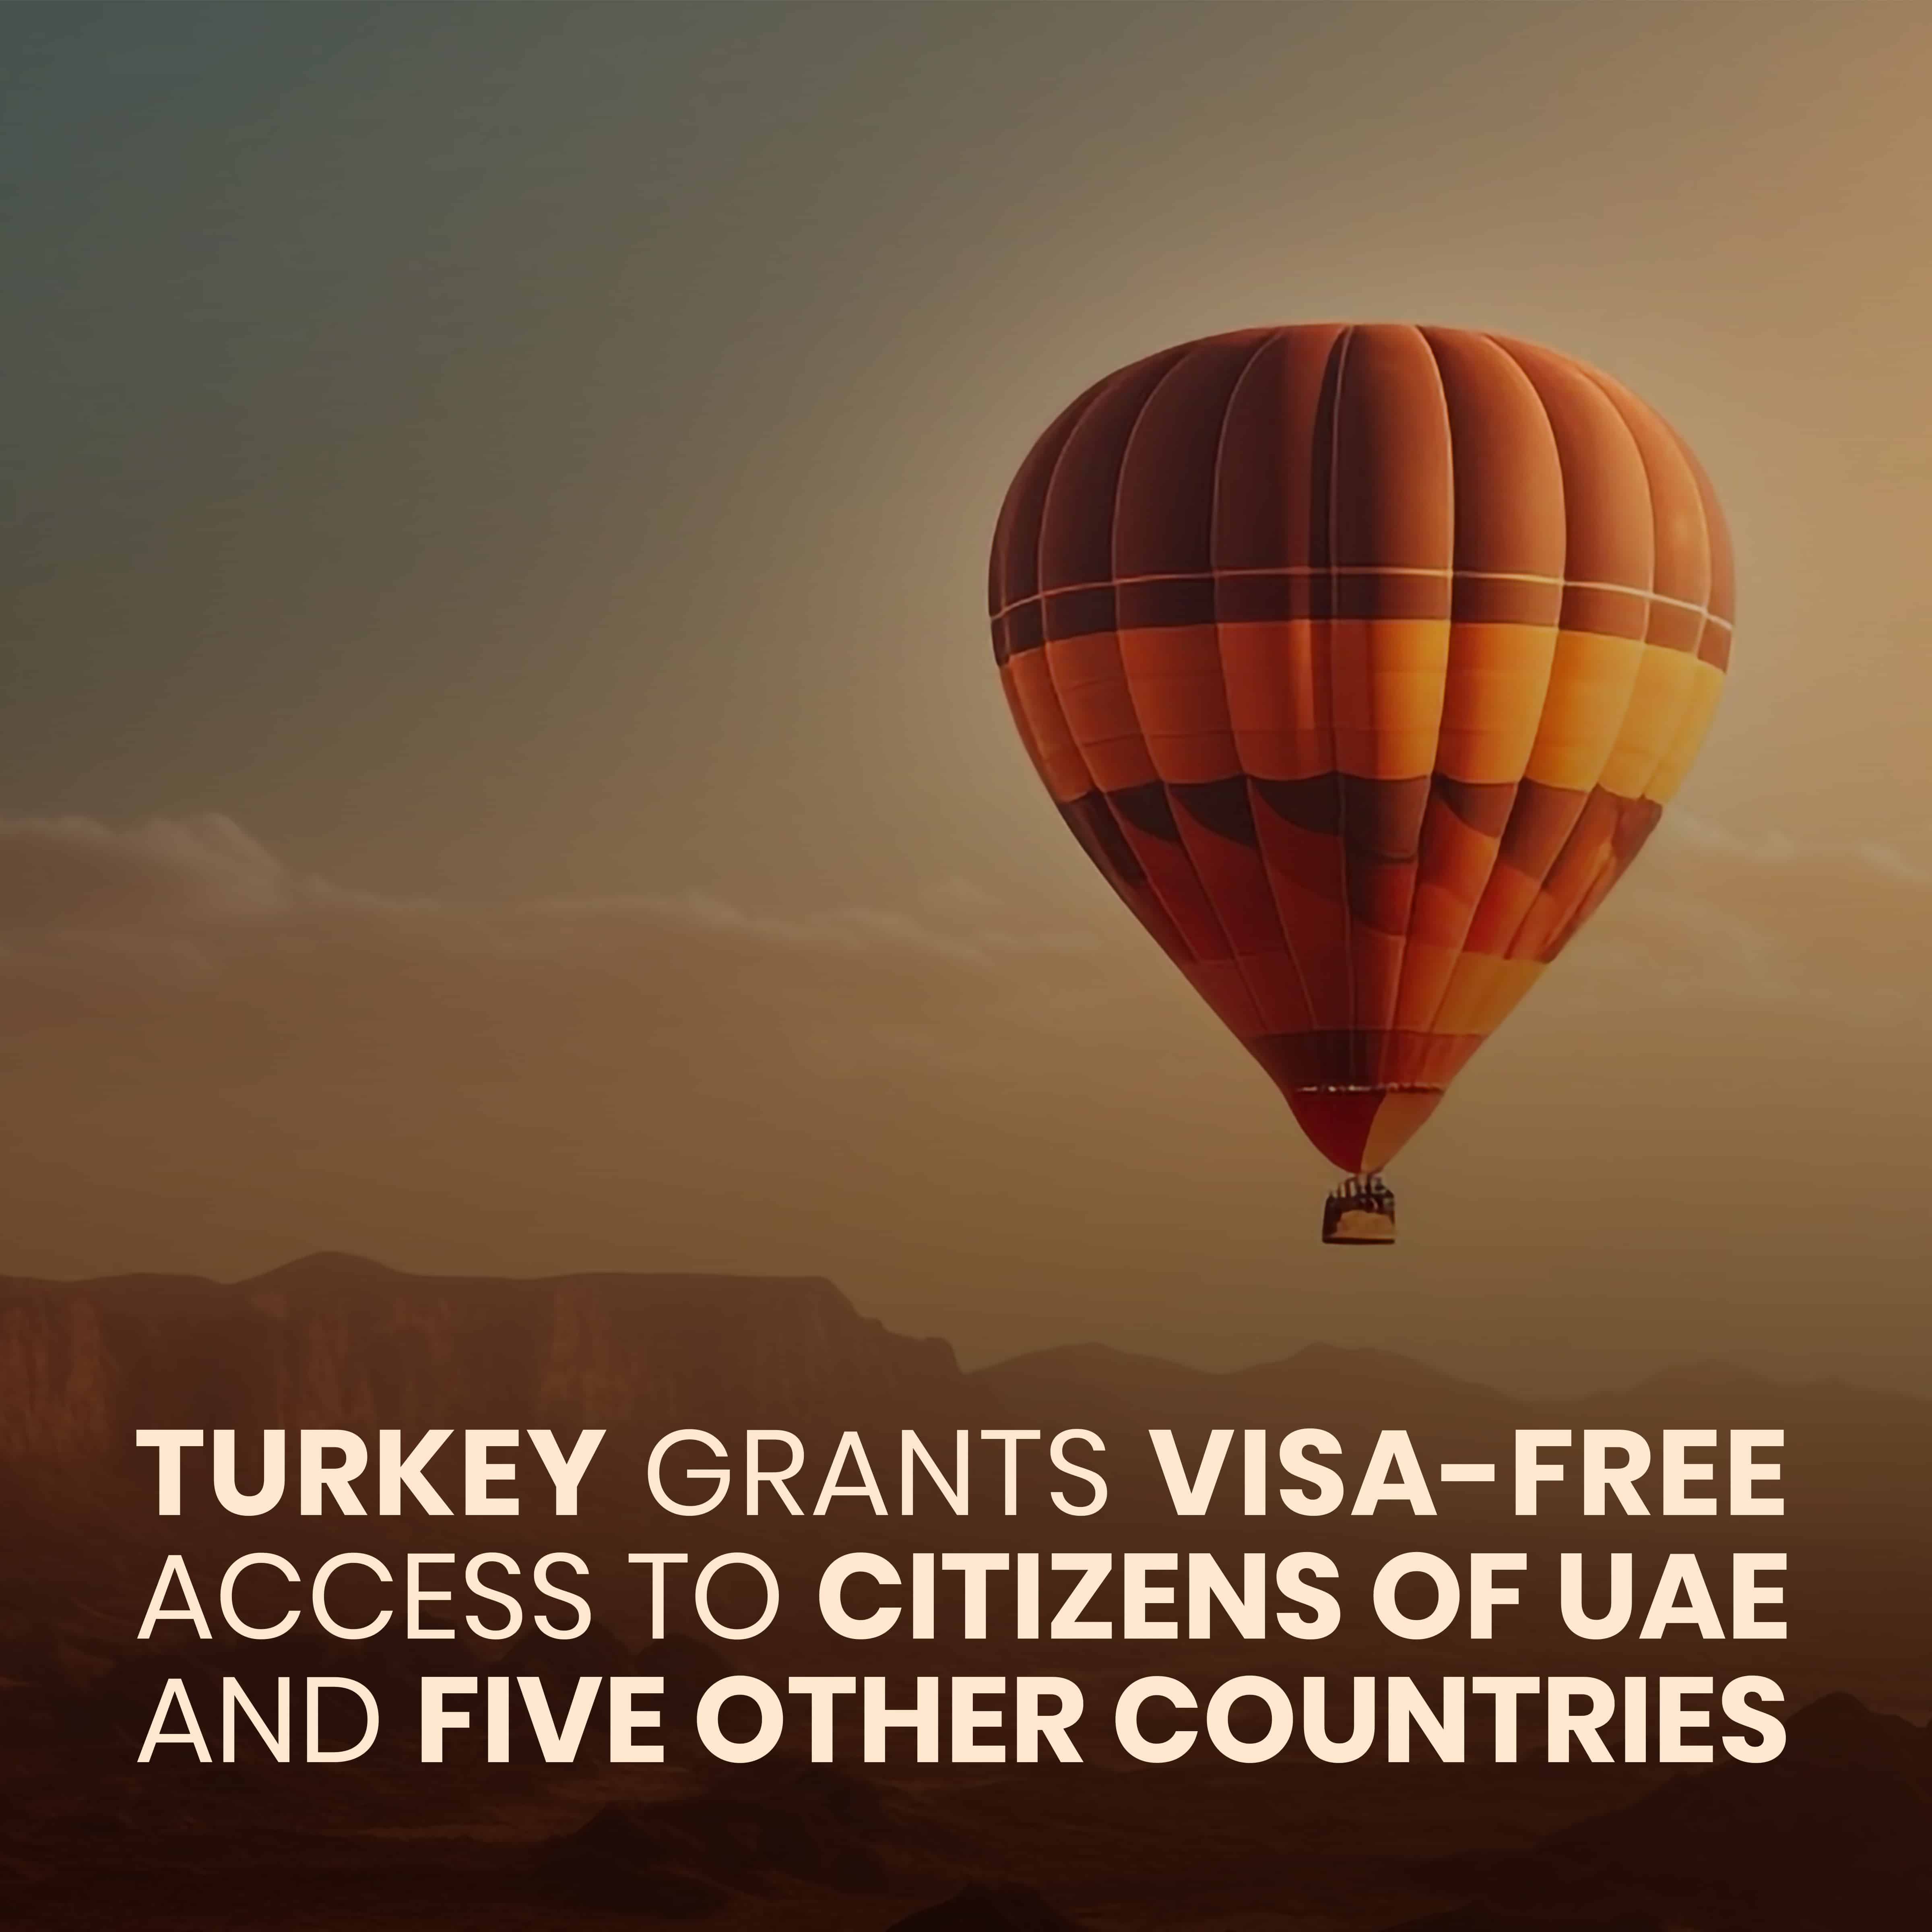 Turkey Grants Visa-Free Access to Citizens of UAE and Five Other Countries